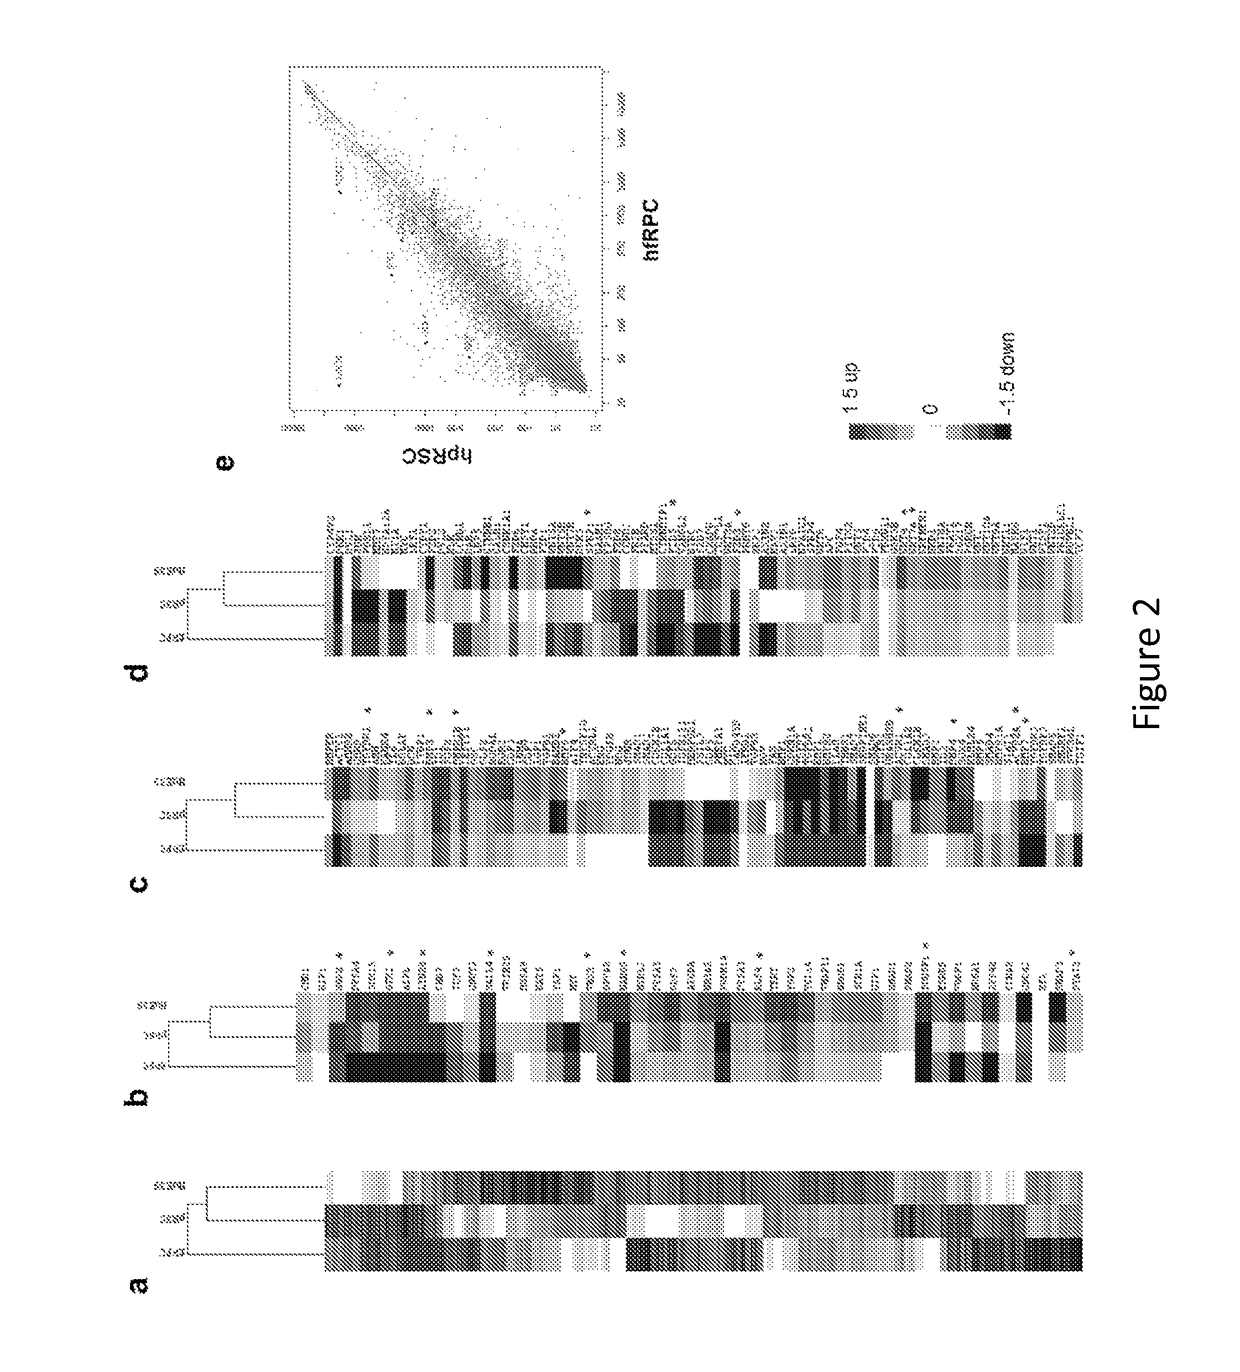 Methods of mammalian retinal stem cell production and applications